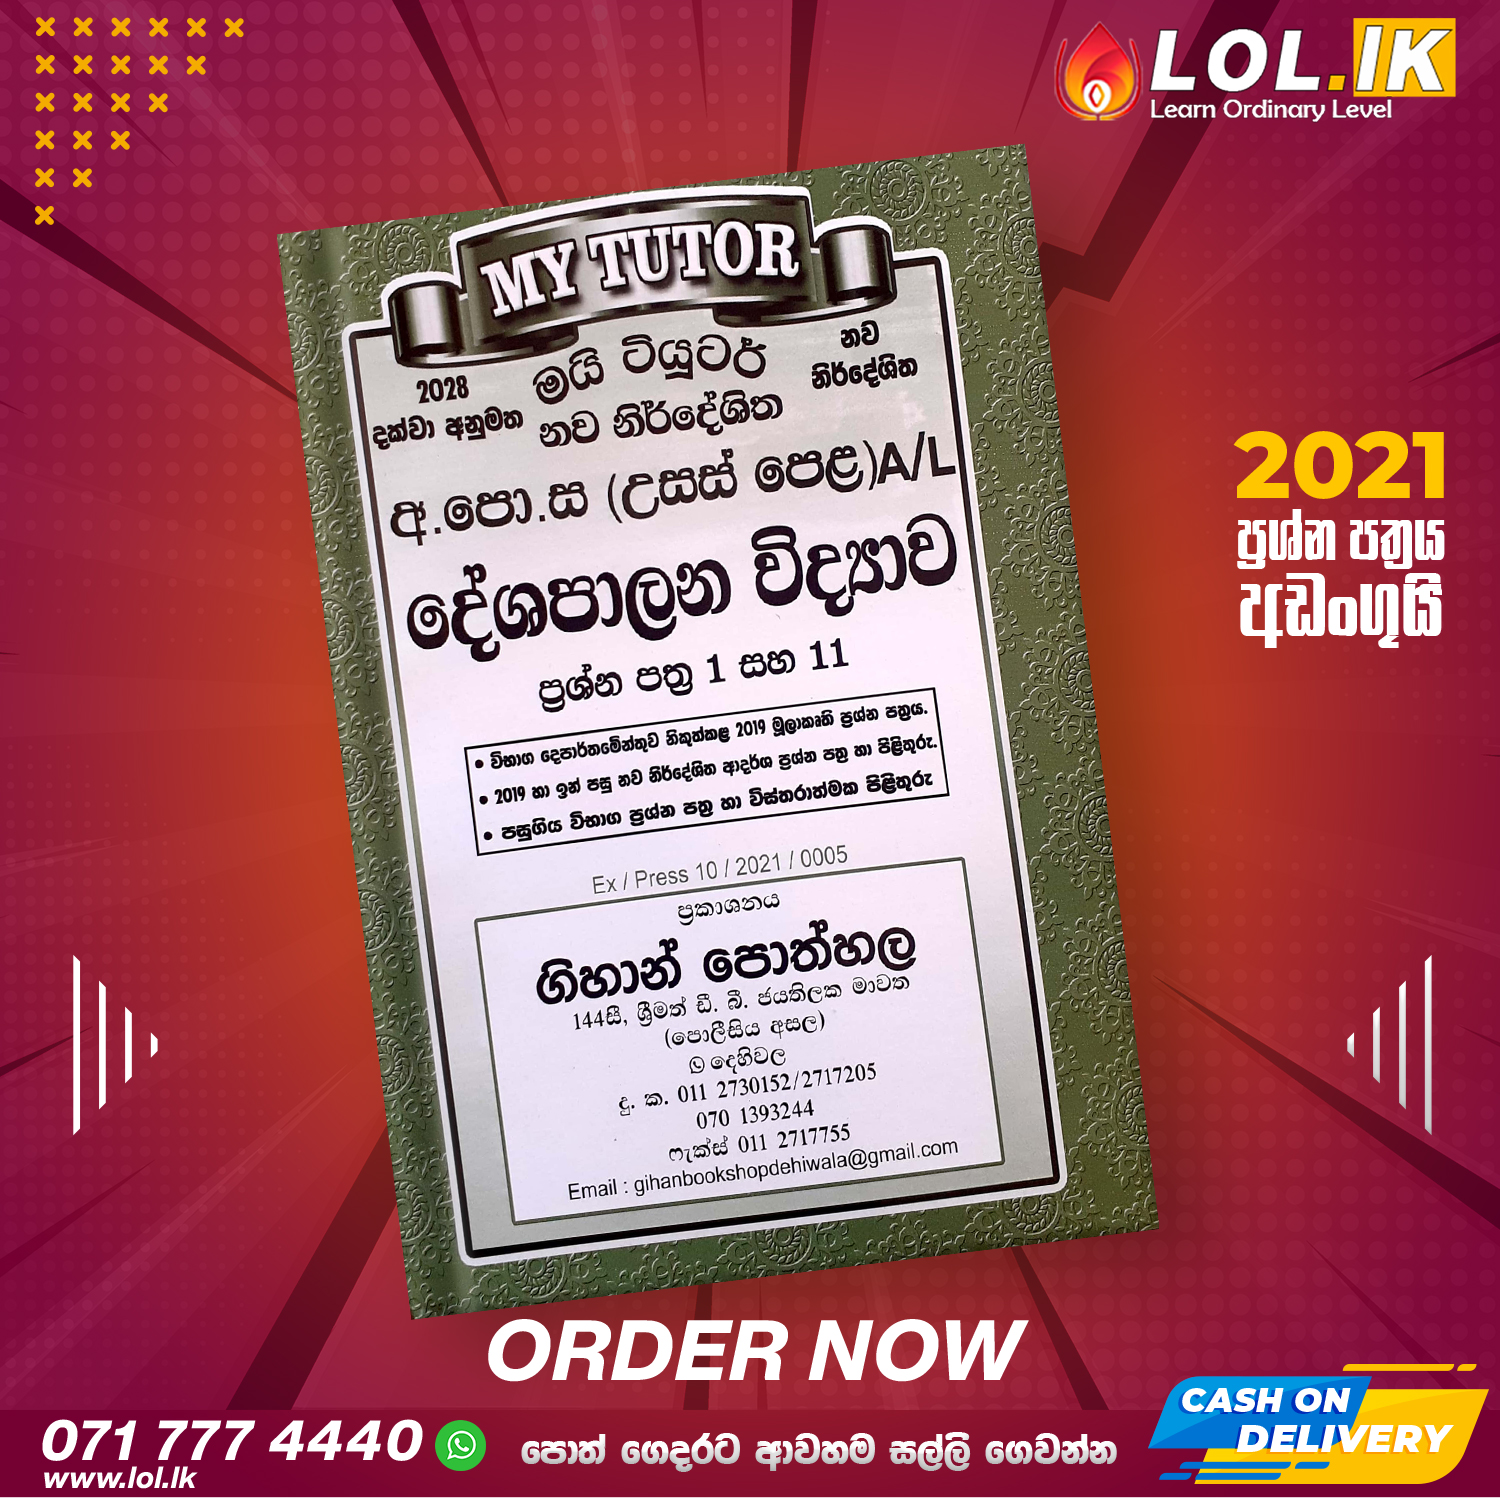 A/L Political Science Music Past Paper Book with Answers(Sinhala Medium) - My Tutor